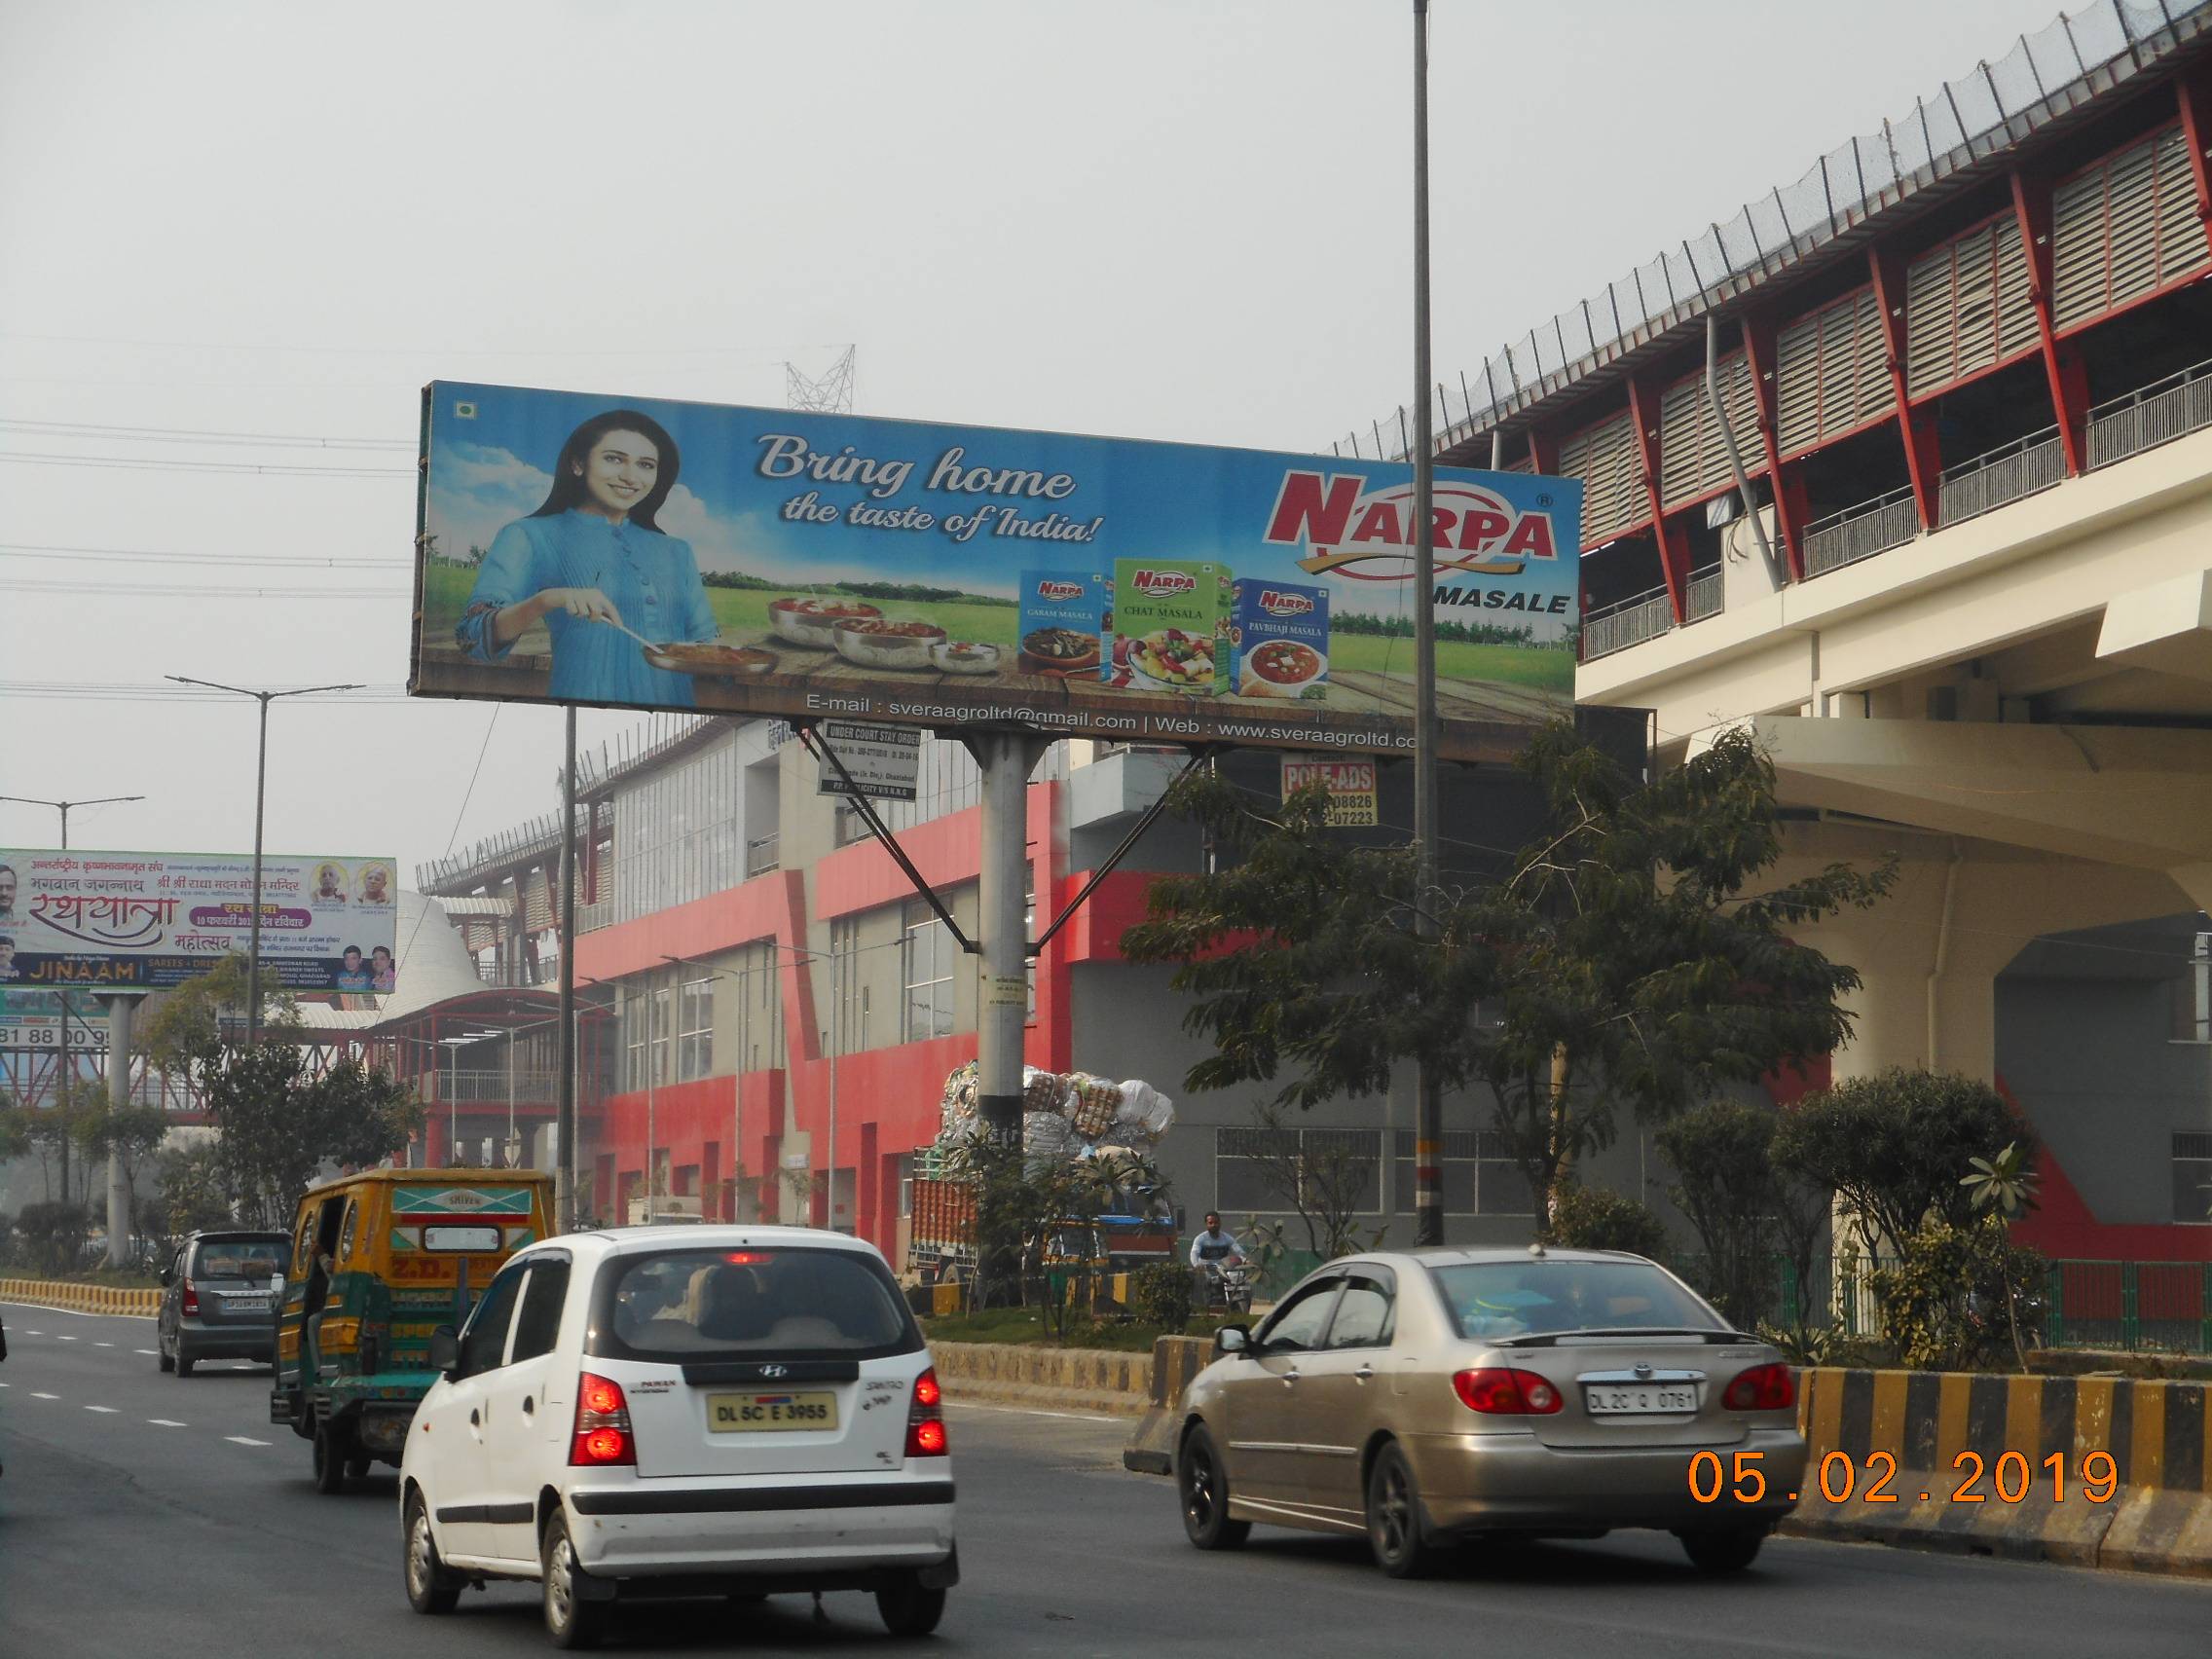 Outdoor Advertising Agency in India